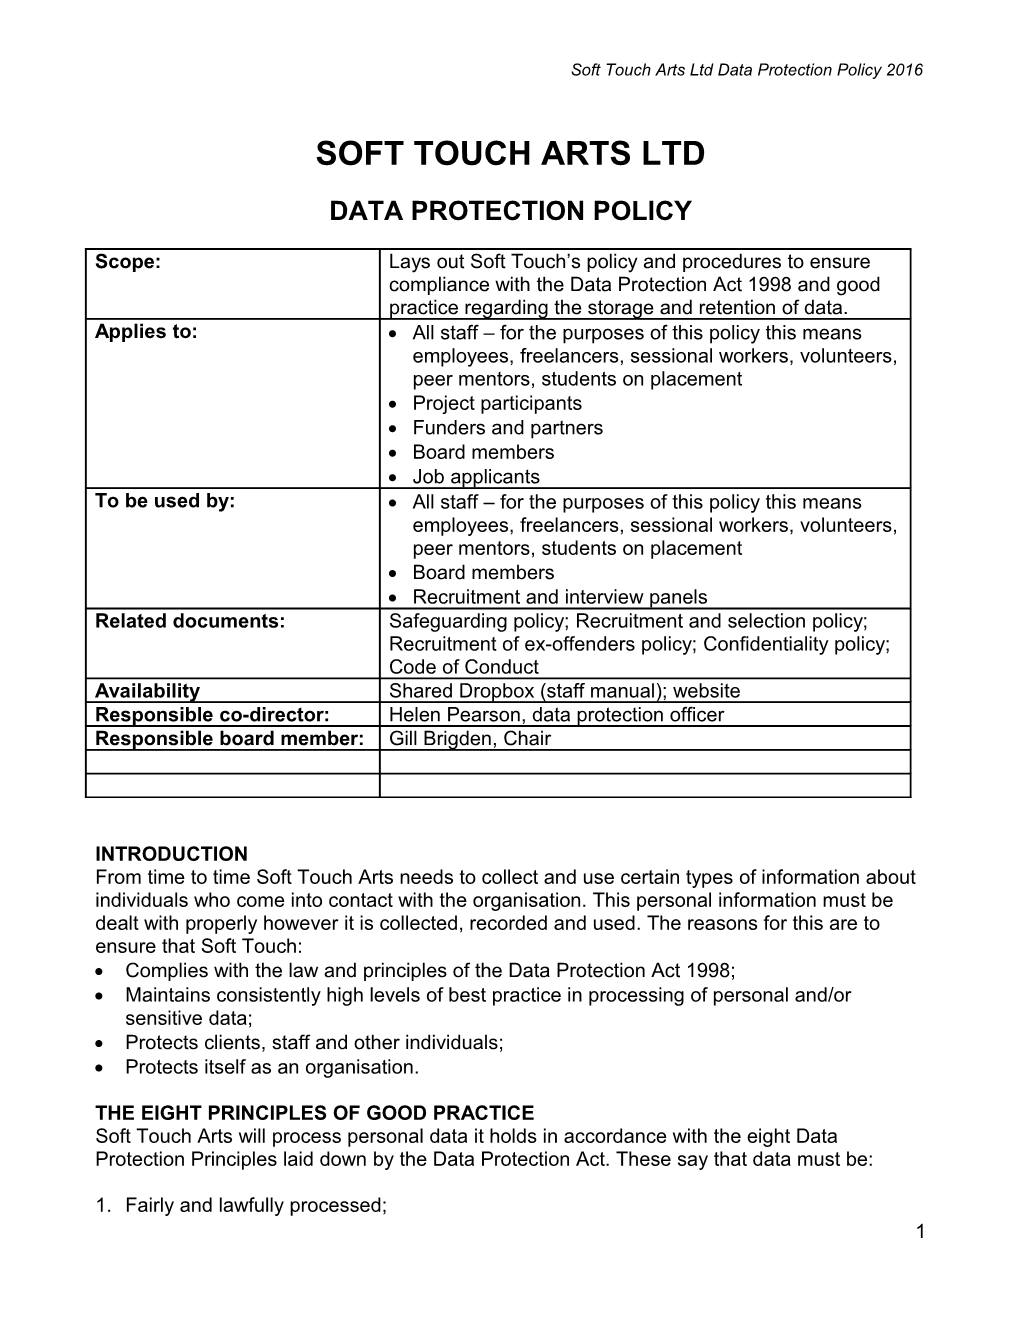 The Organisation Data Protection Policy